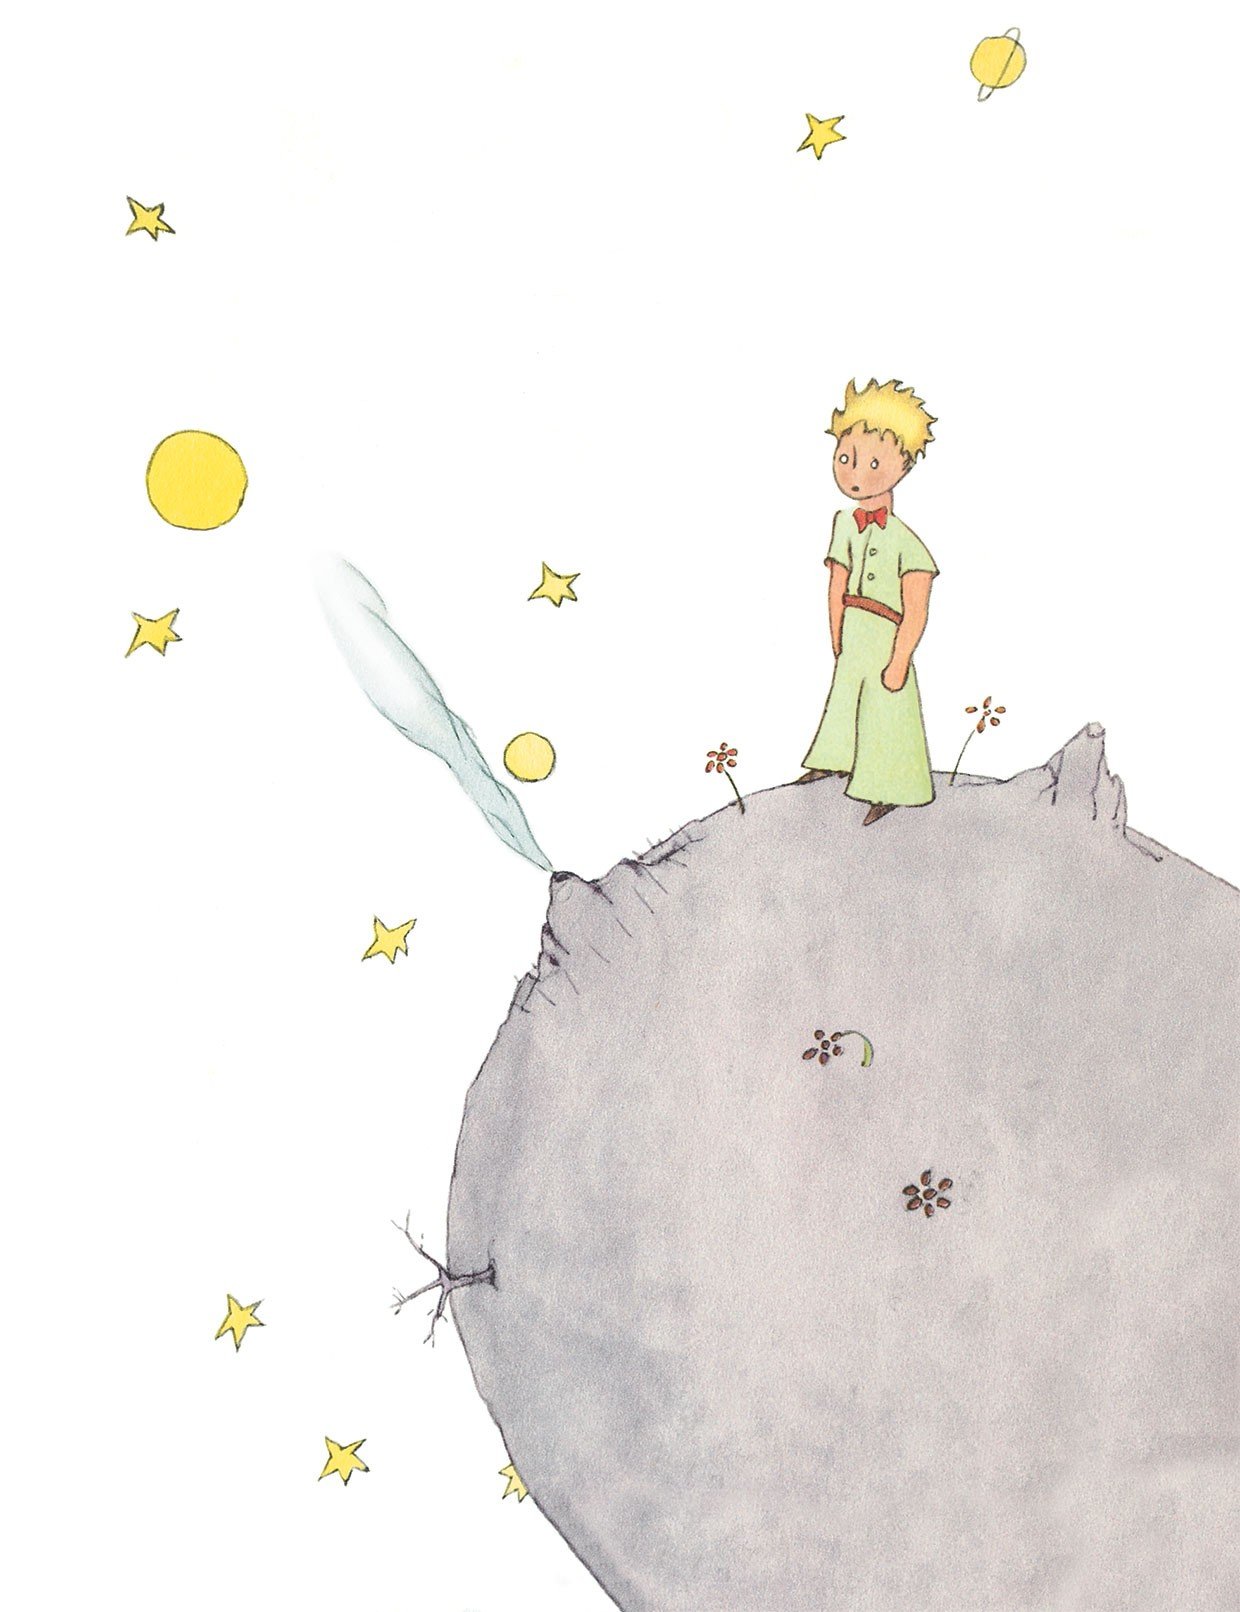 The Enduring Reign of The Little Prince | Waterstones.com Blog